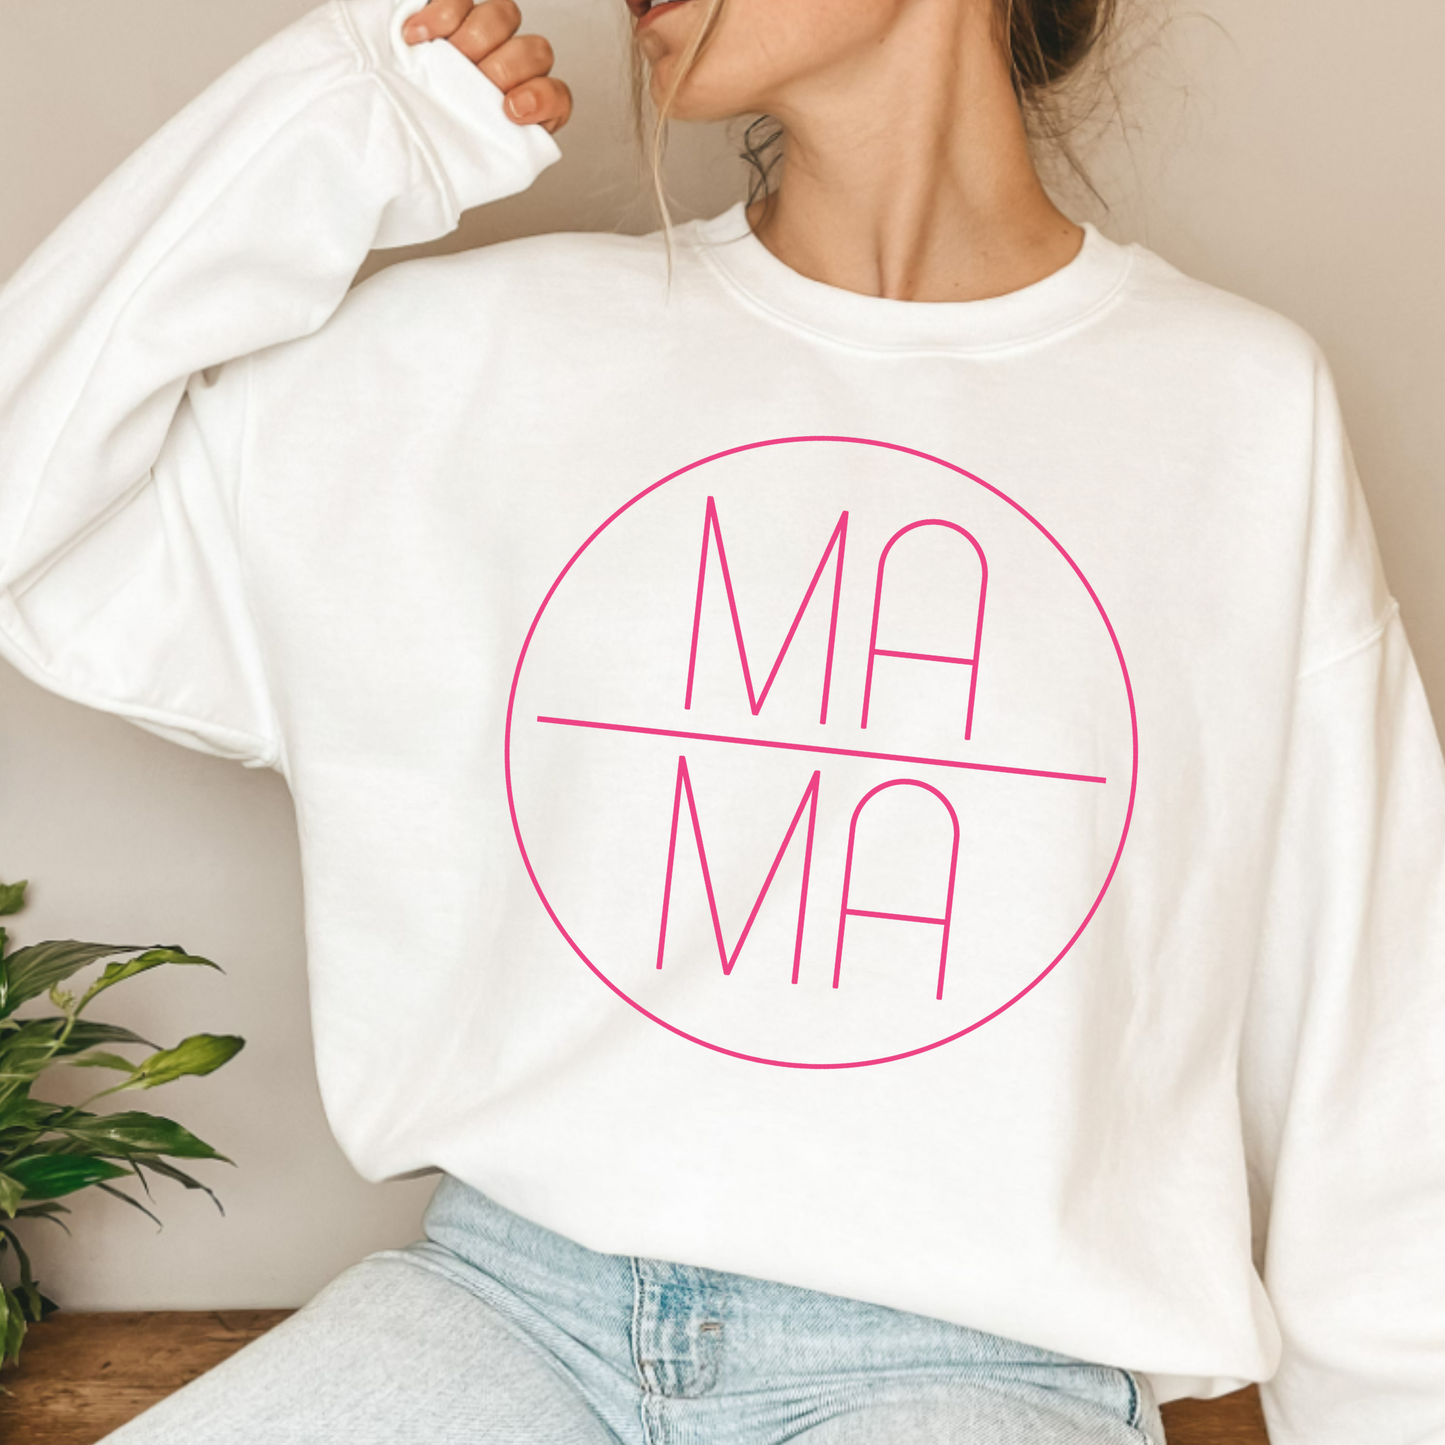 (shirt not included) MAMA in Pink - Screen print Transfer